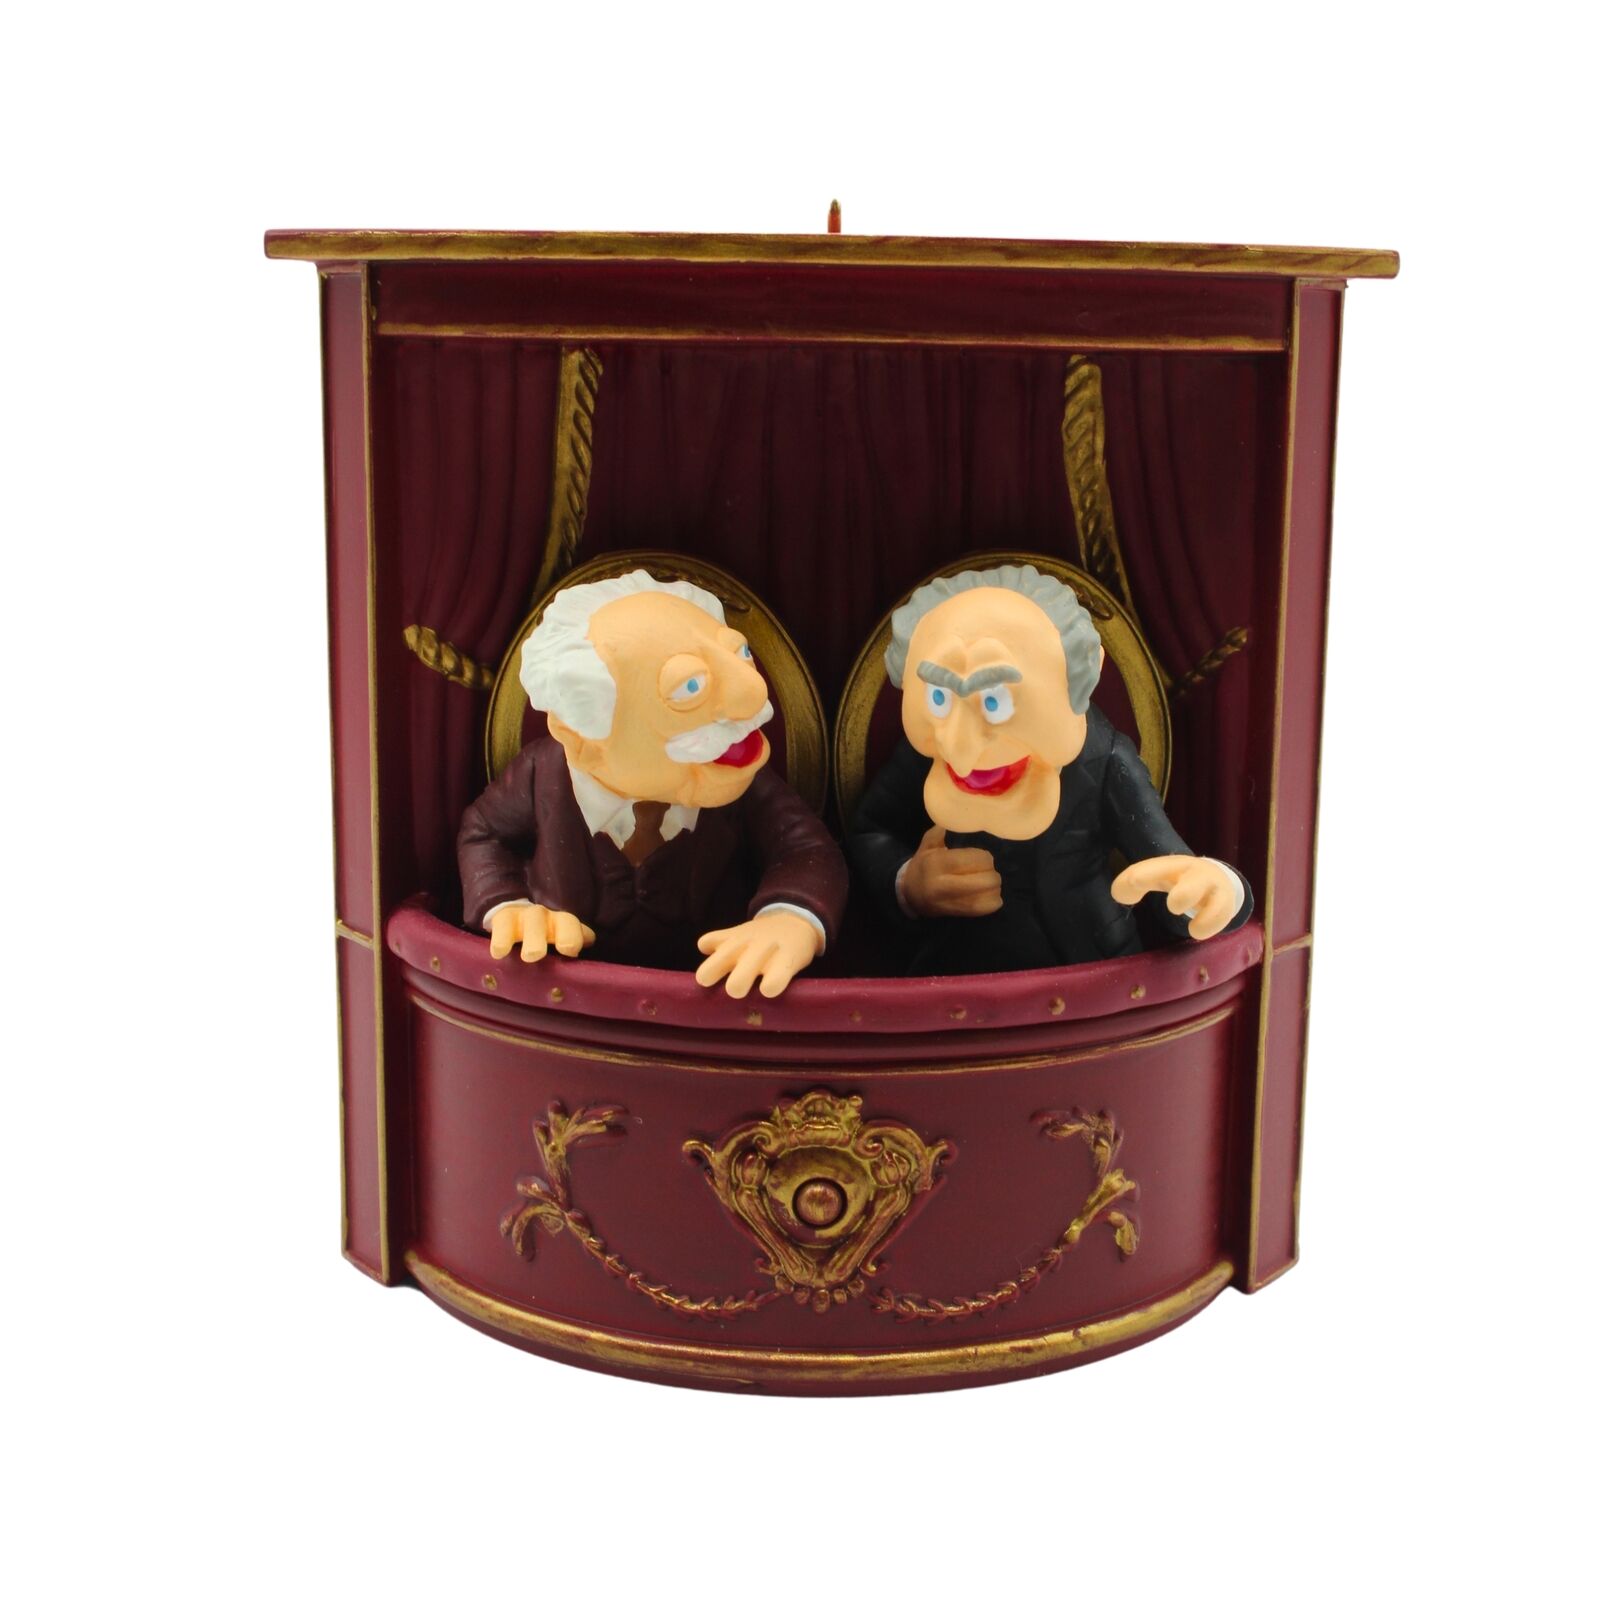 Hallmark Ornament: 2008 Statler and Waldorf | QXI2184 | The Muppets